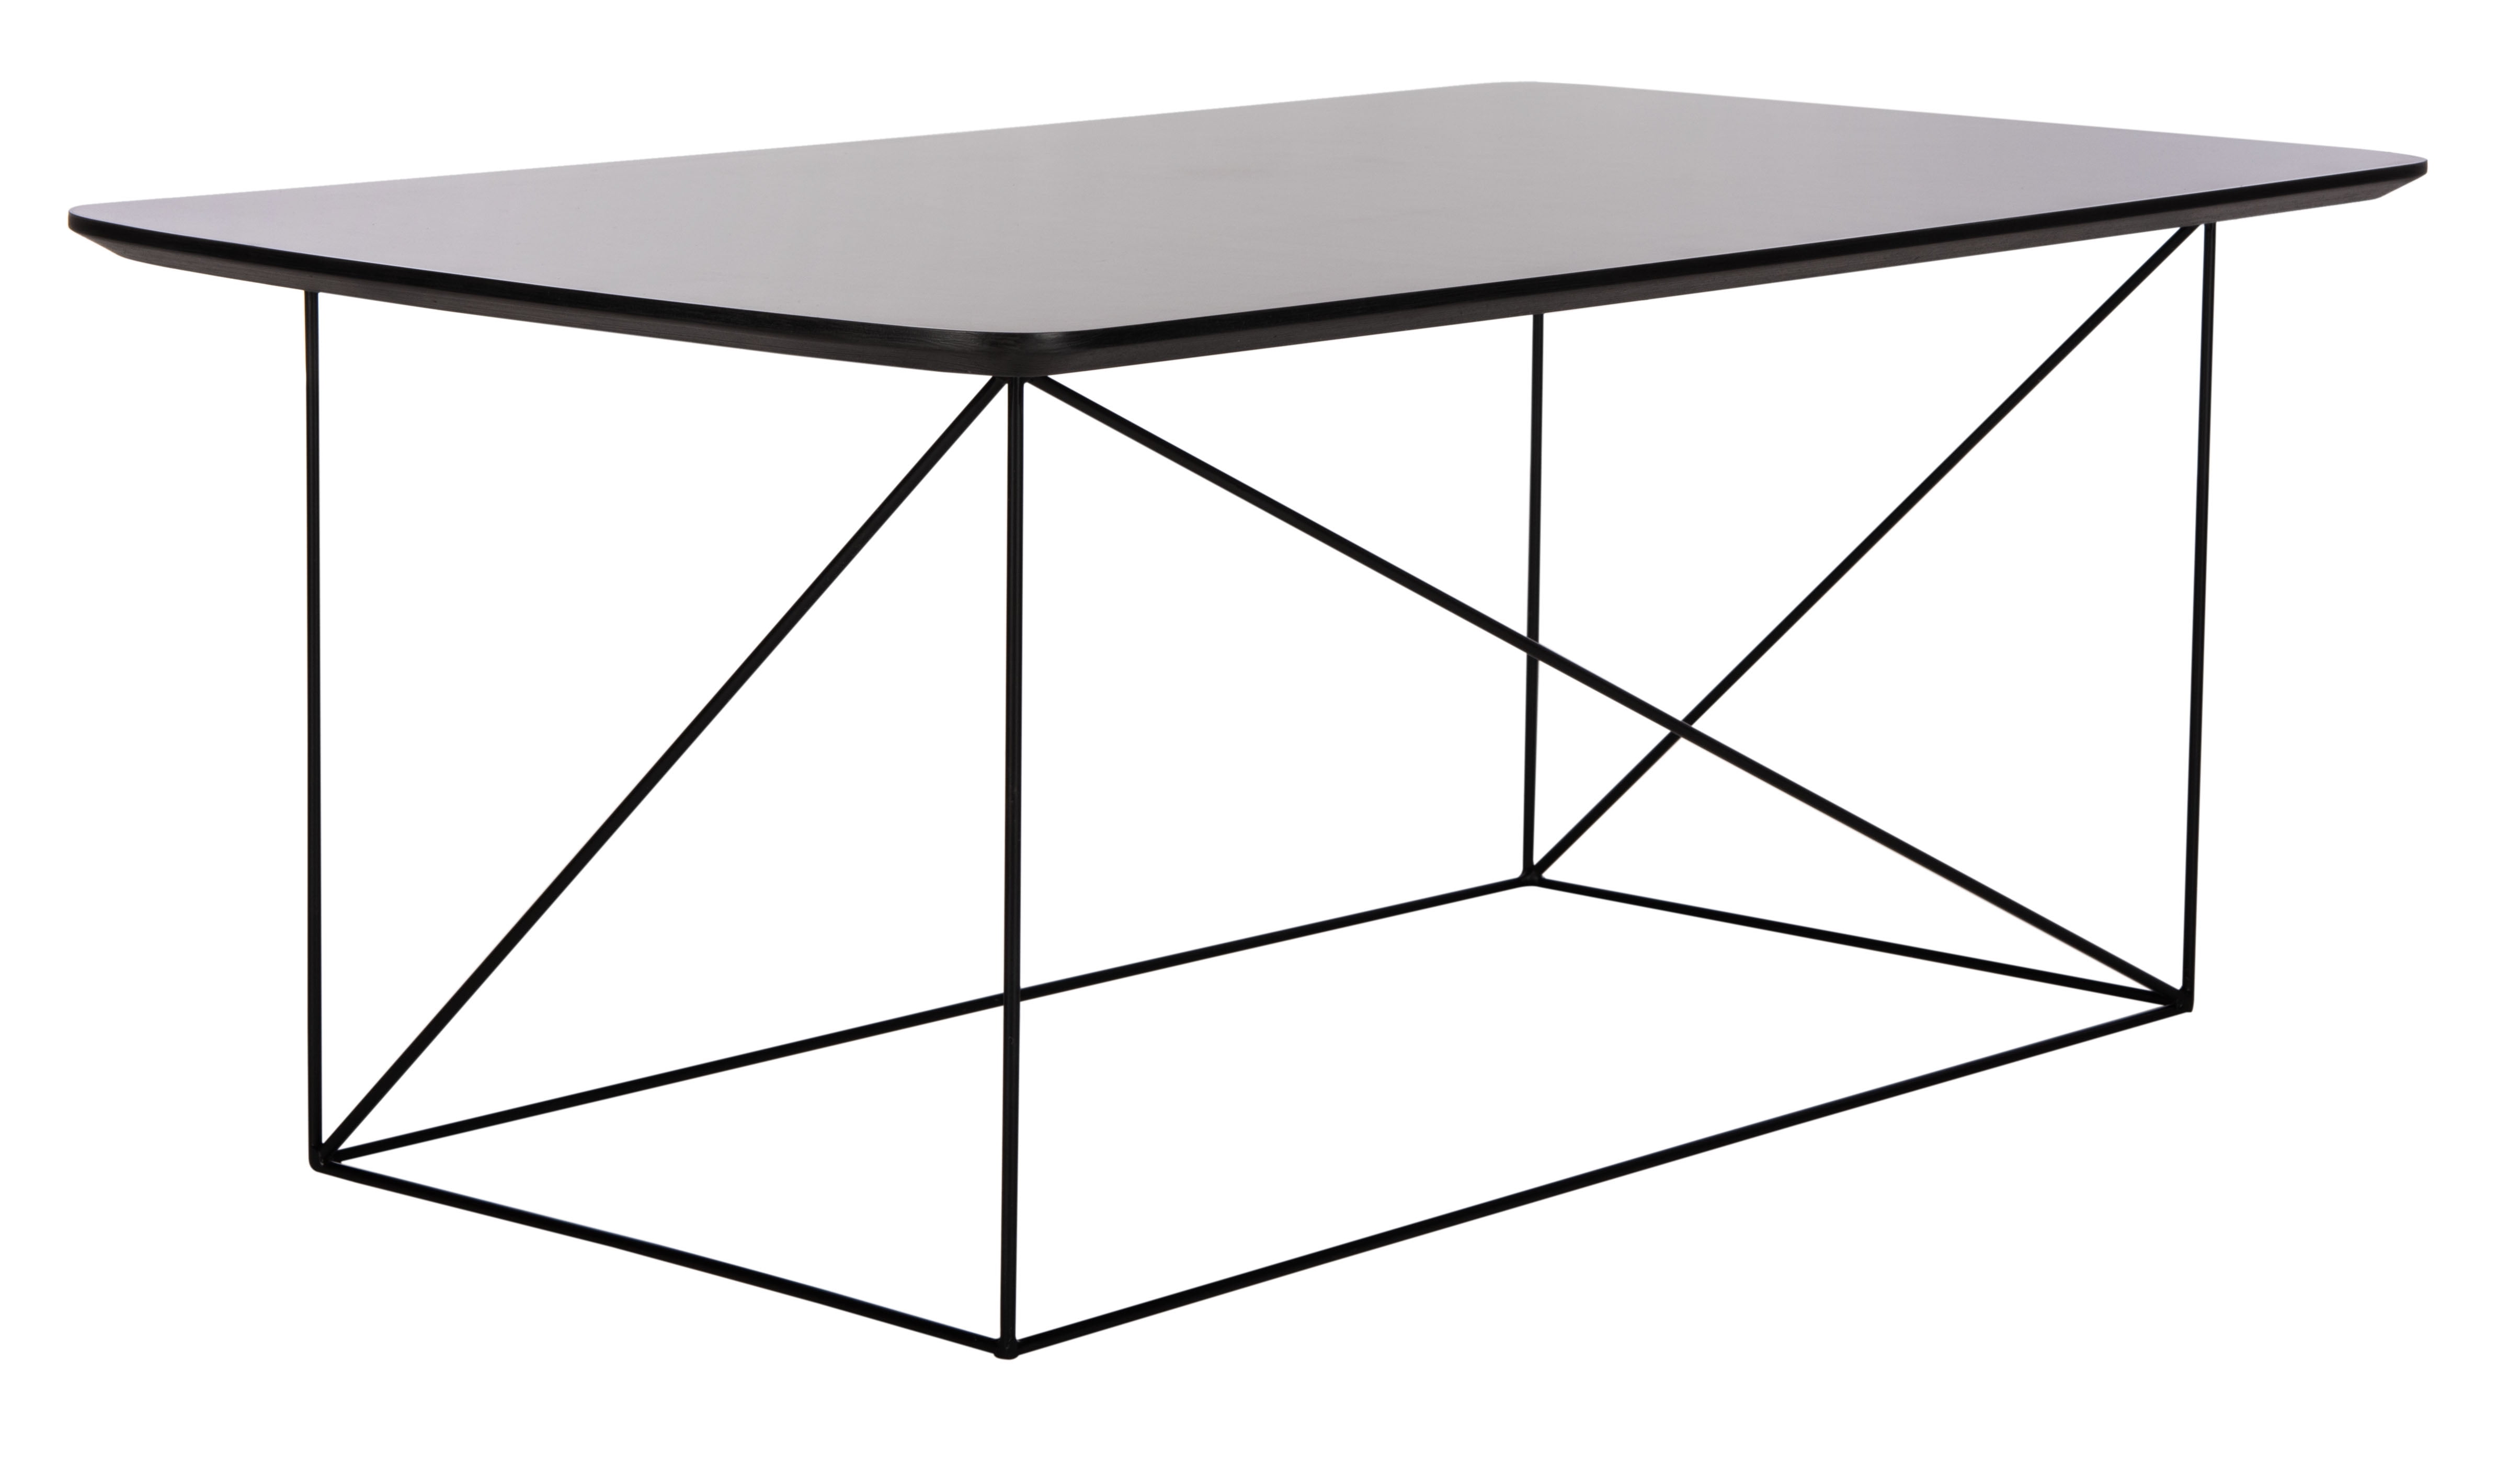 Safavieh Home Rylee Taupe and Black Rectangle Coffee Table